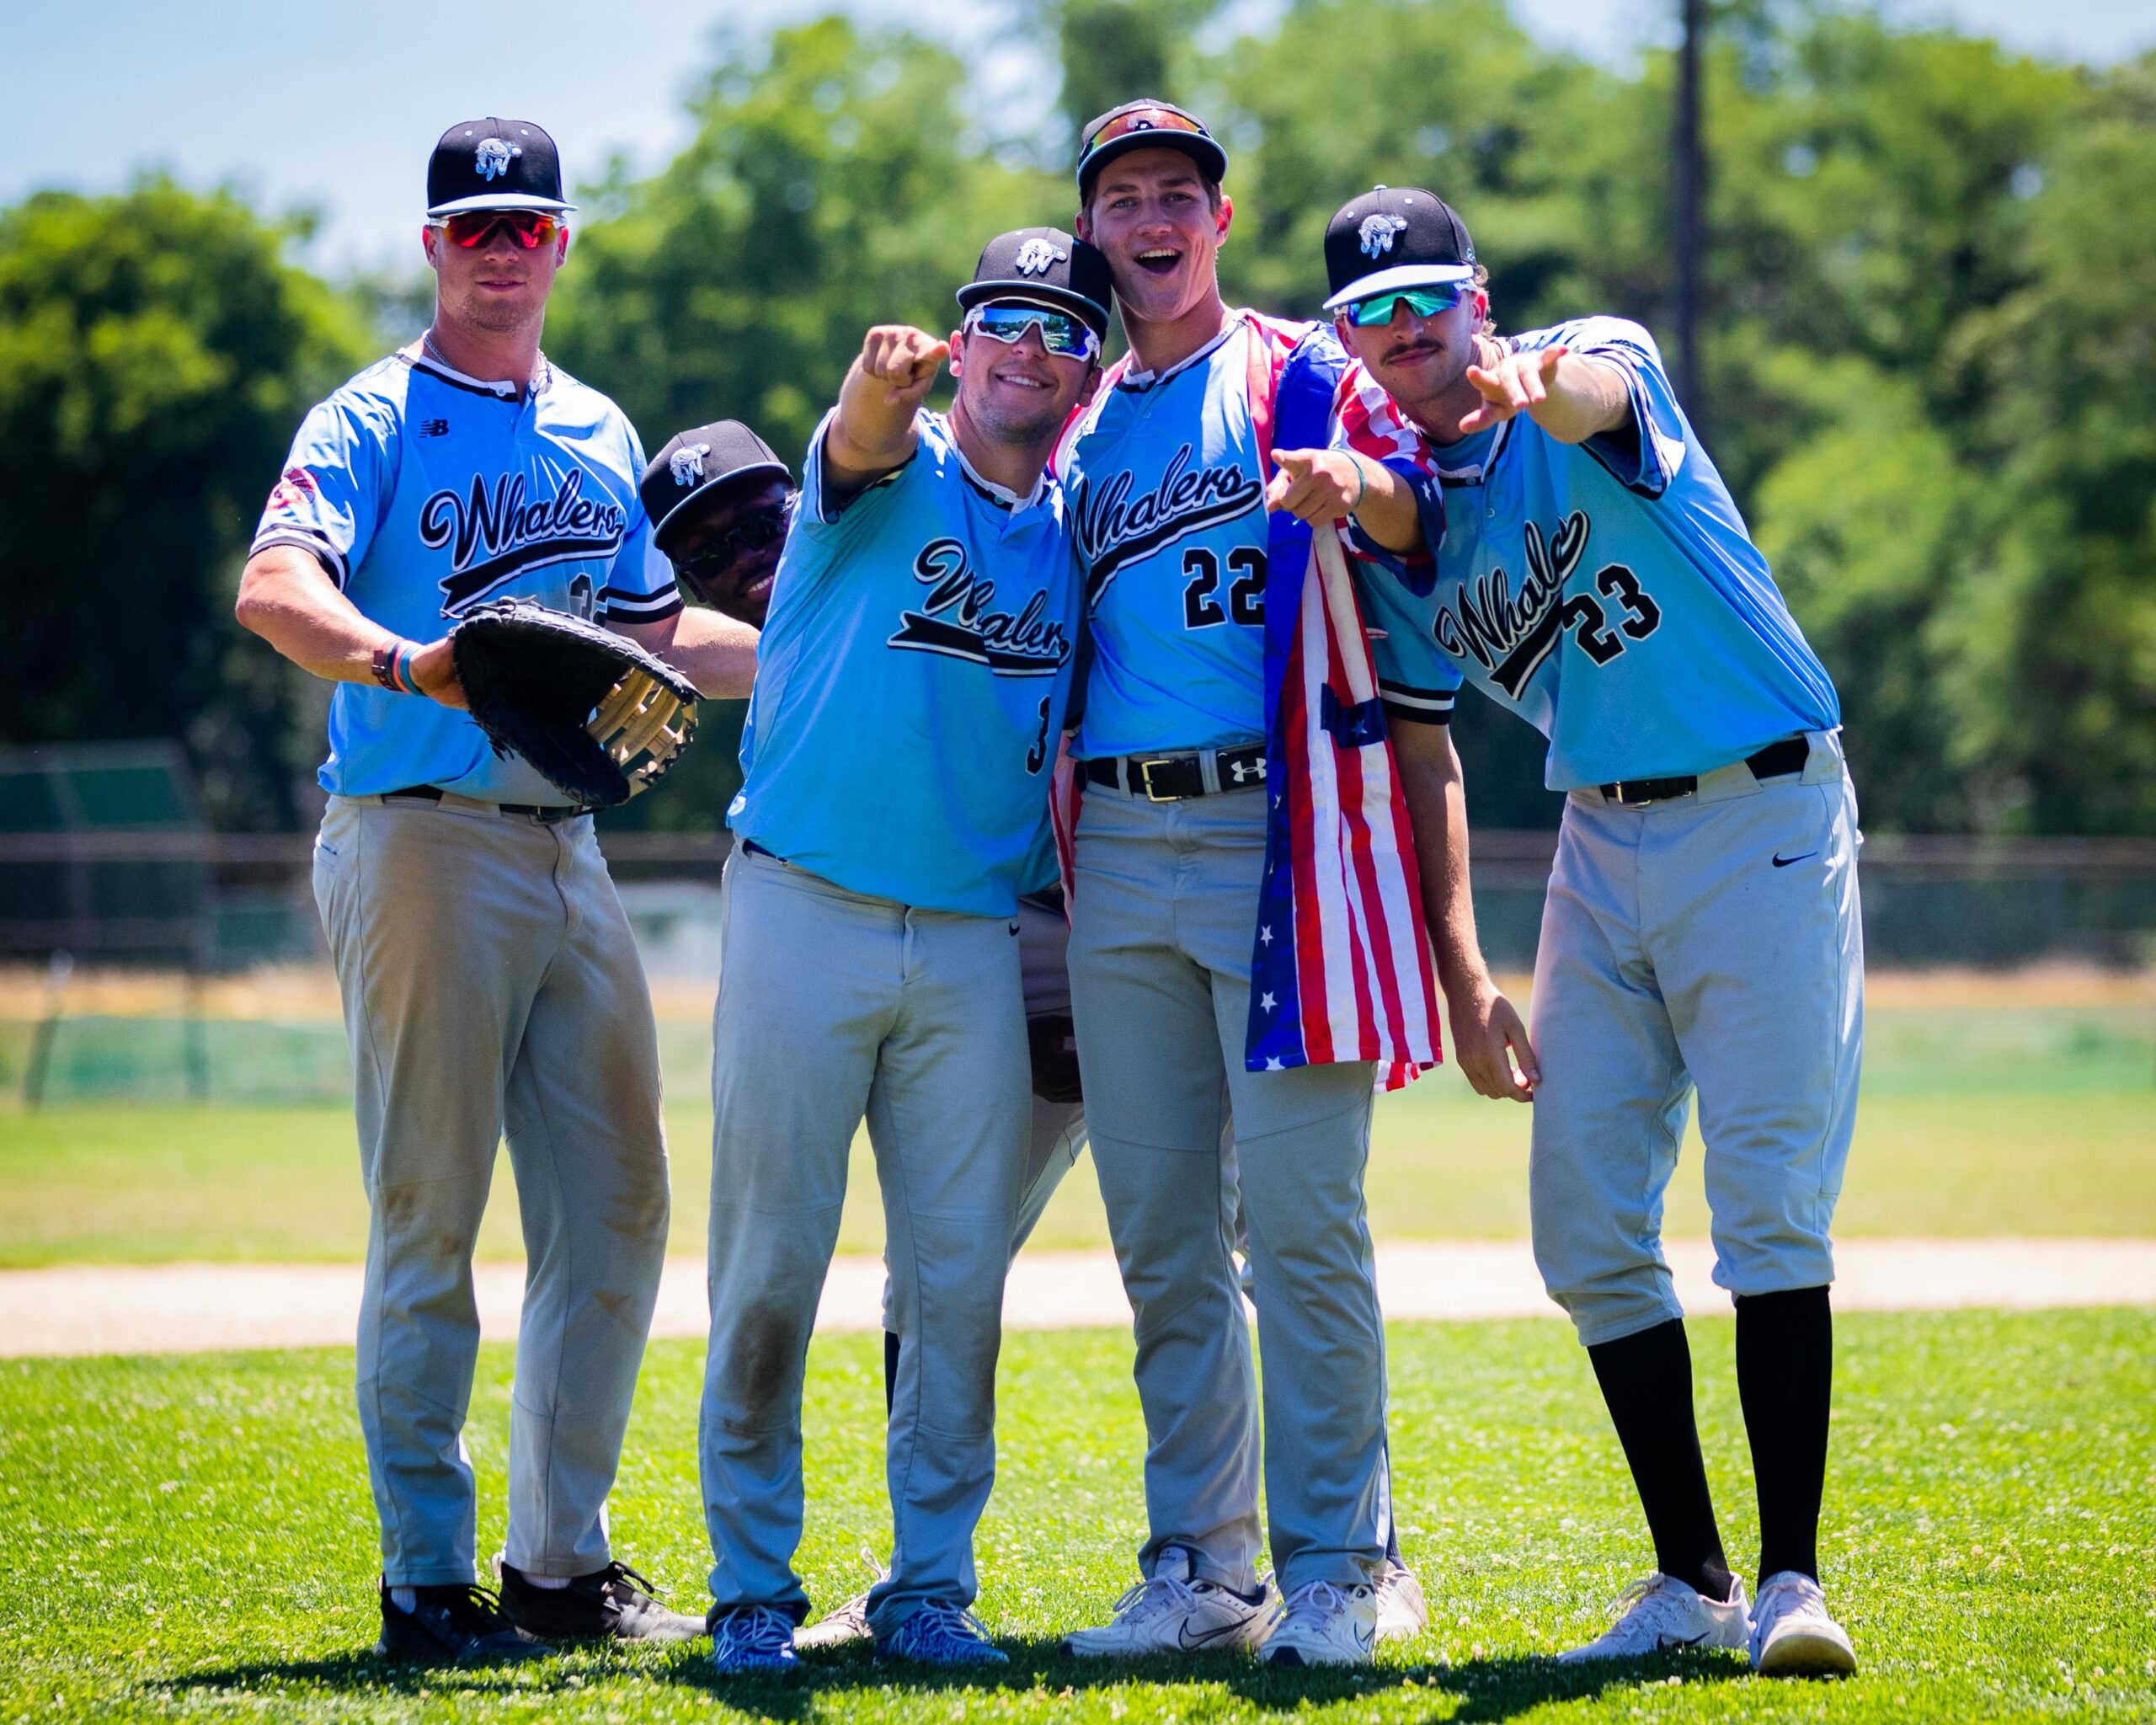 The Whalers celebrating the Fourth of July after their 5-2 victory over the Shelter Island Bucks on Monday.    DEMETRIUS KAZANAS